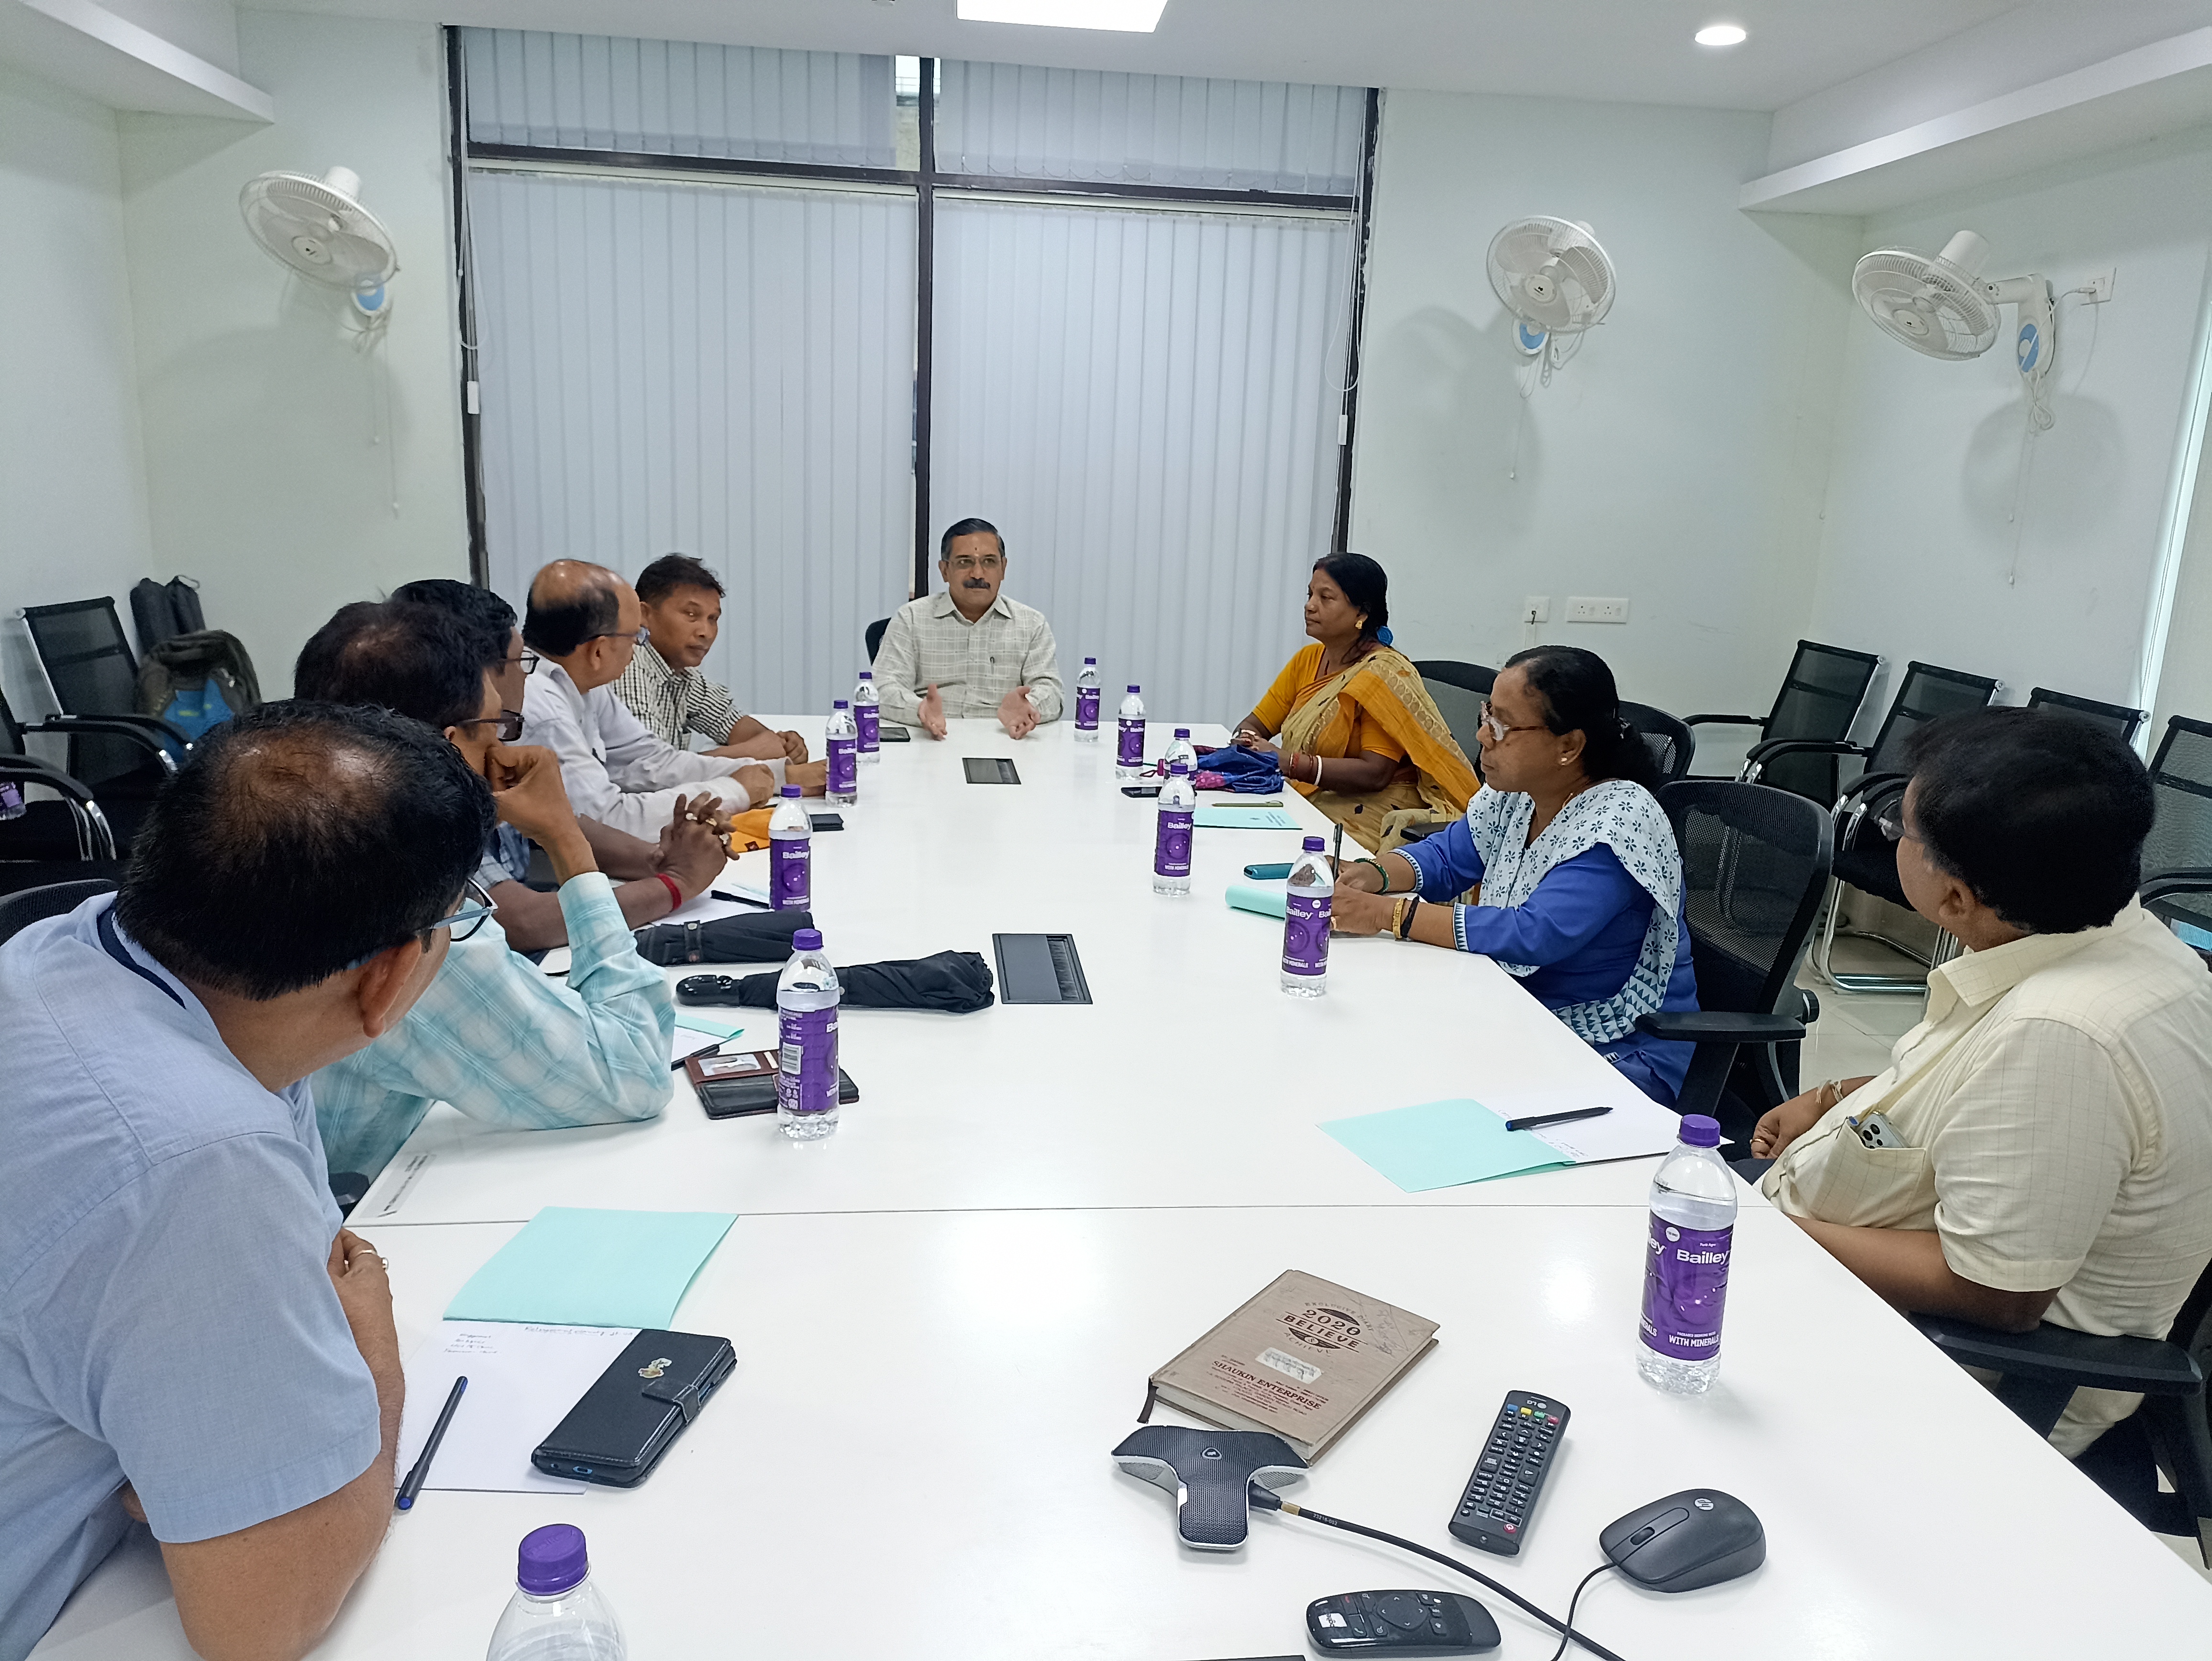 Awareness Session on Retirement Planning for Employees on 28 Jun 23